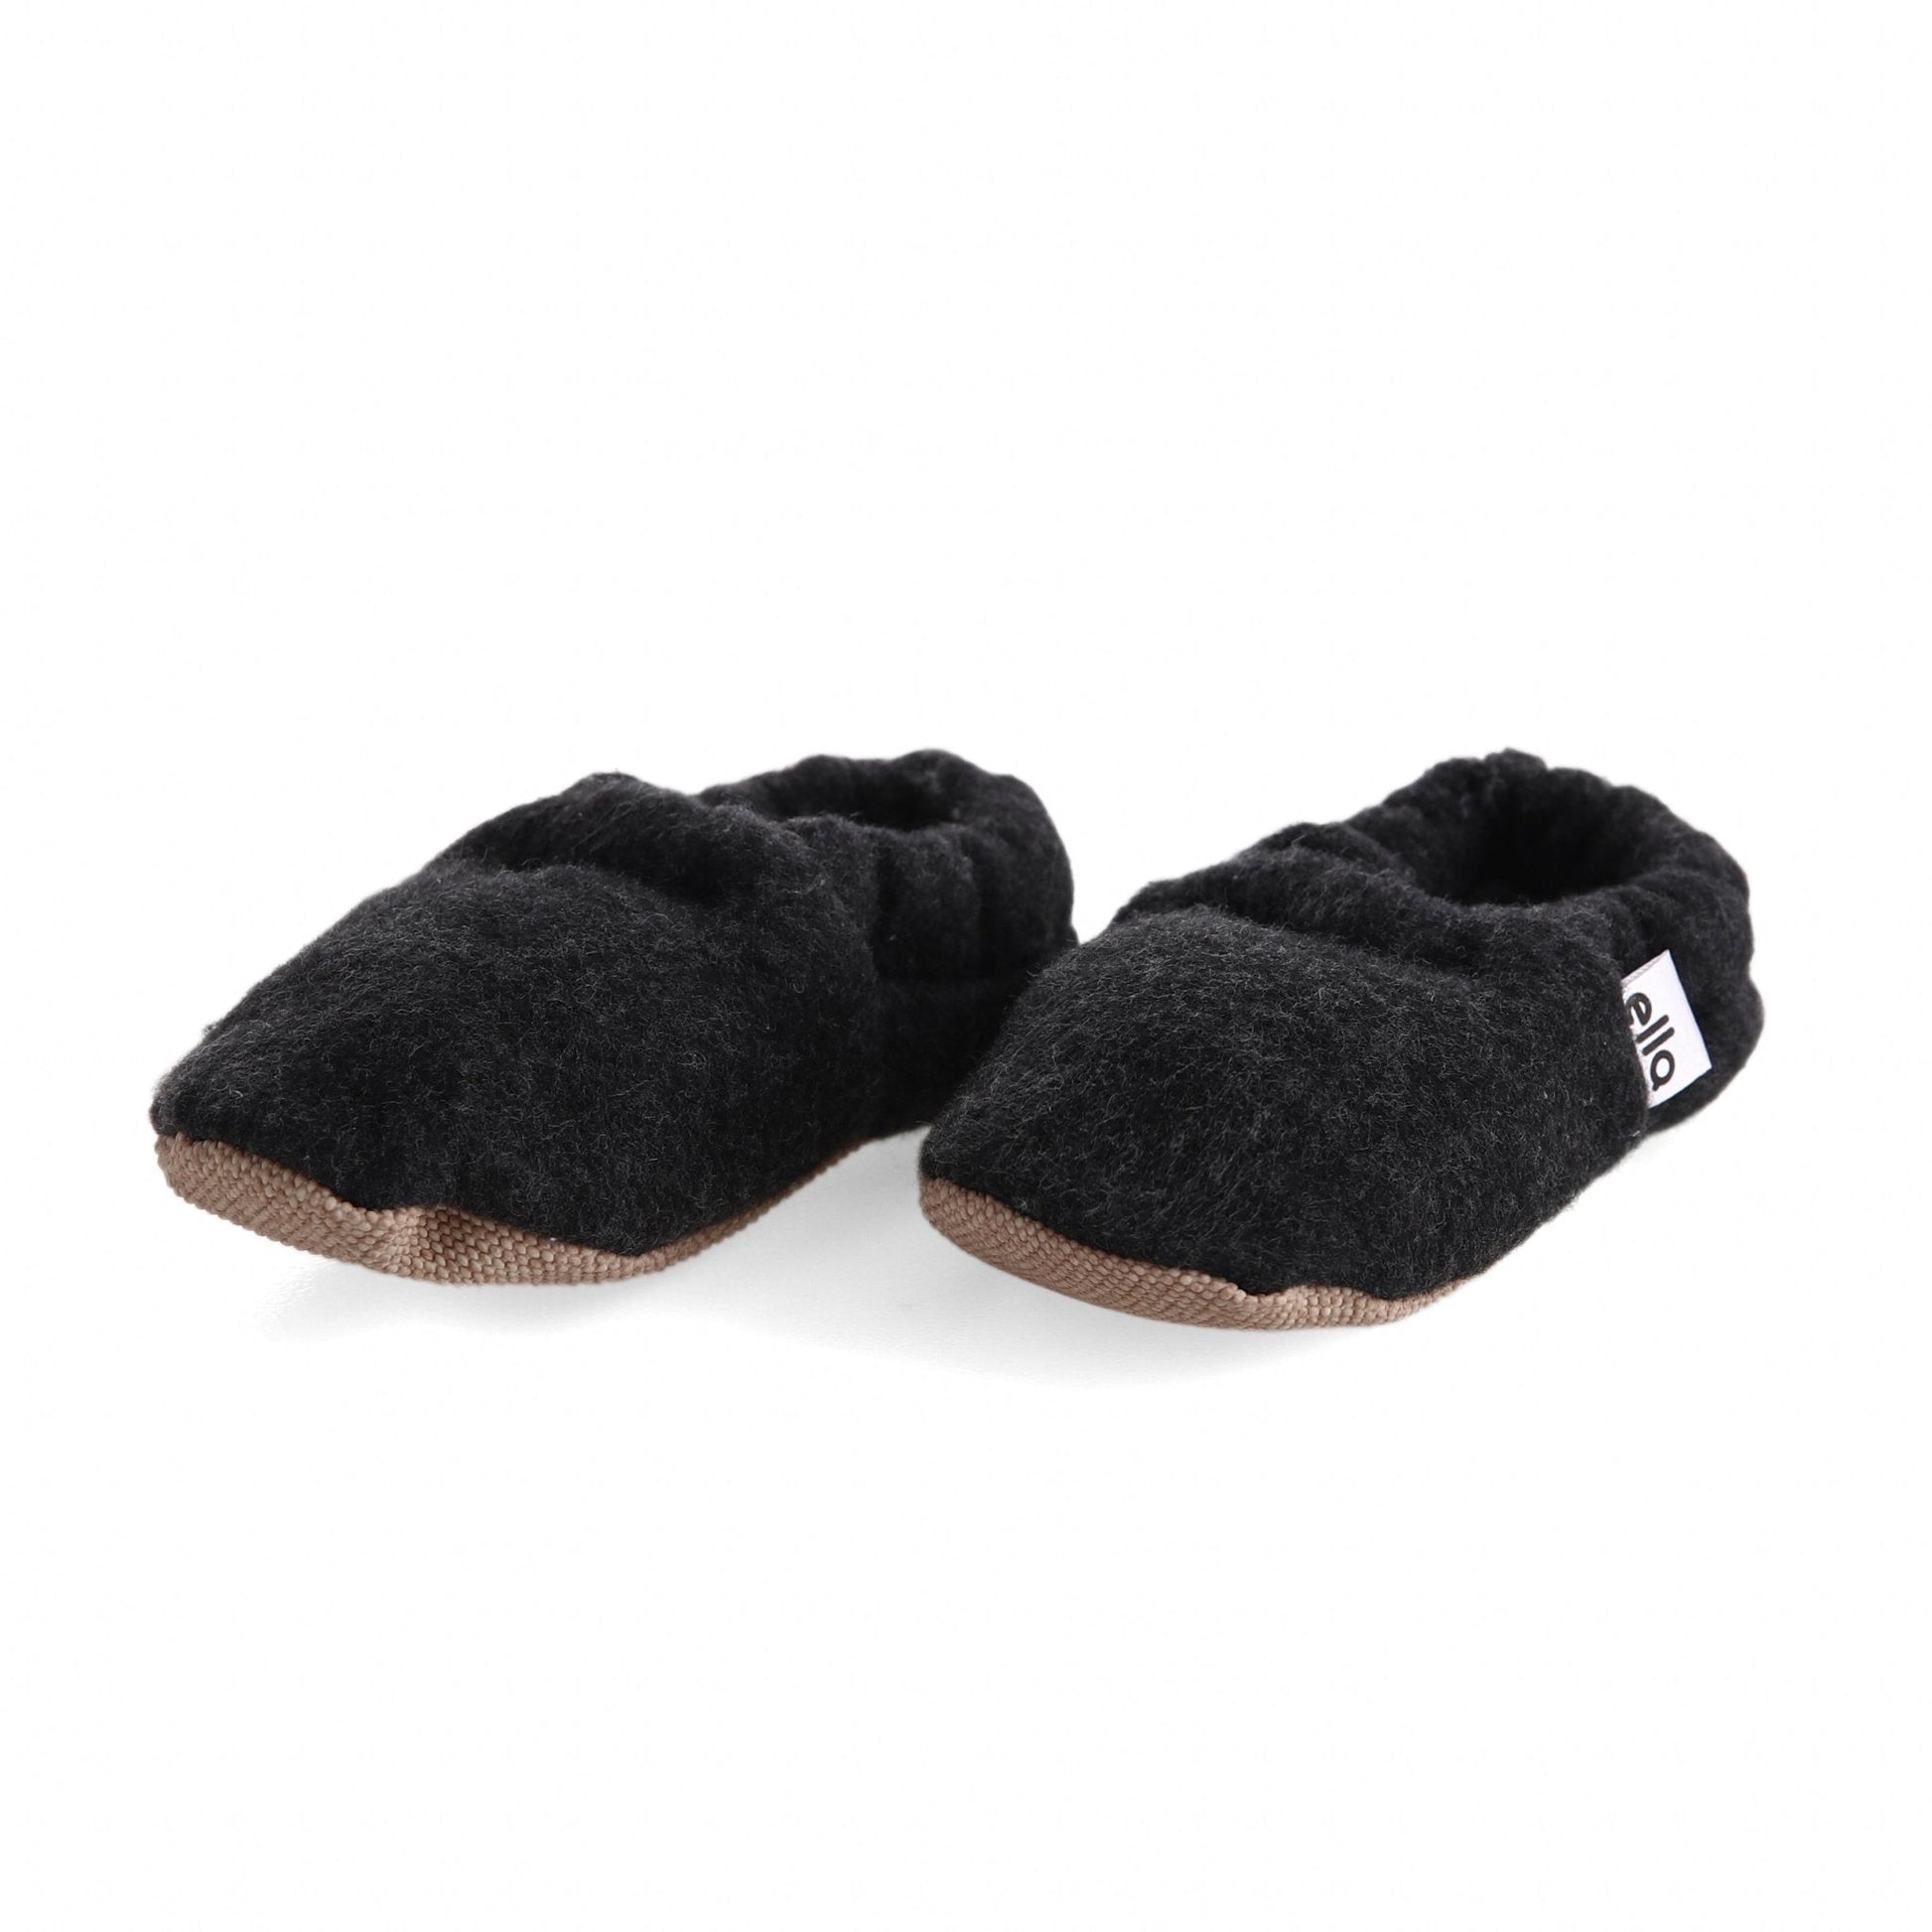 Anthracite Baby House Booties